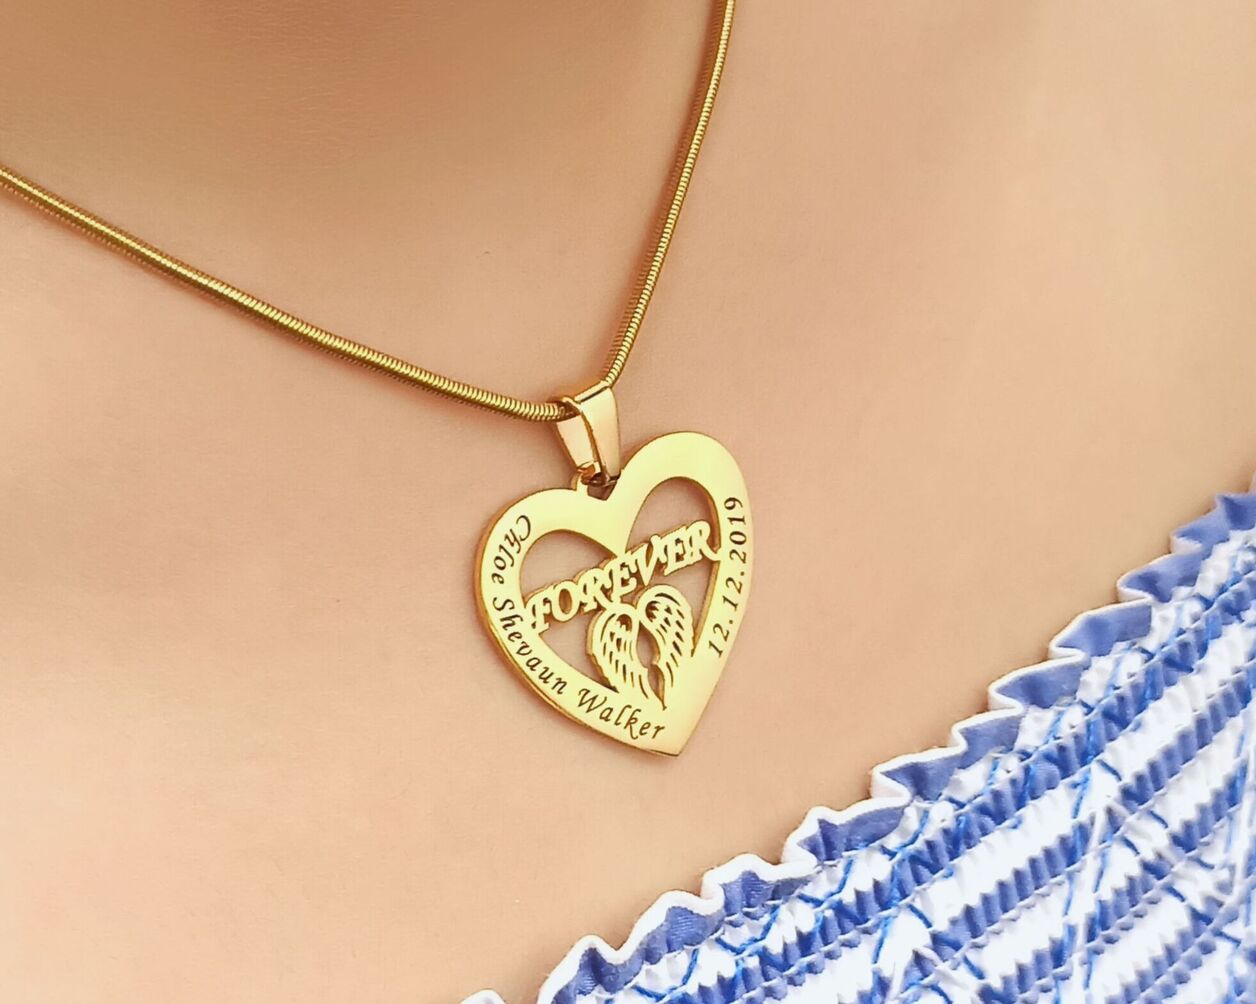 💖 Keep the memory of a loved one close with a personalised necklace - BELLE FEVER